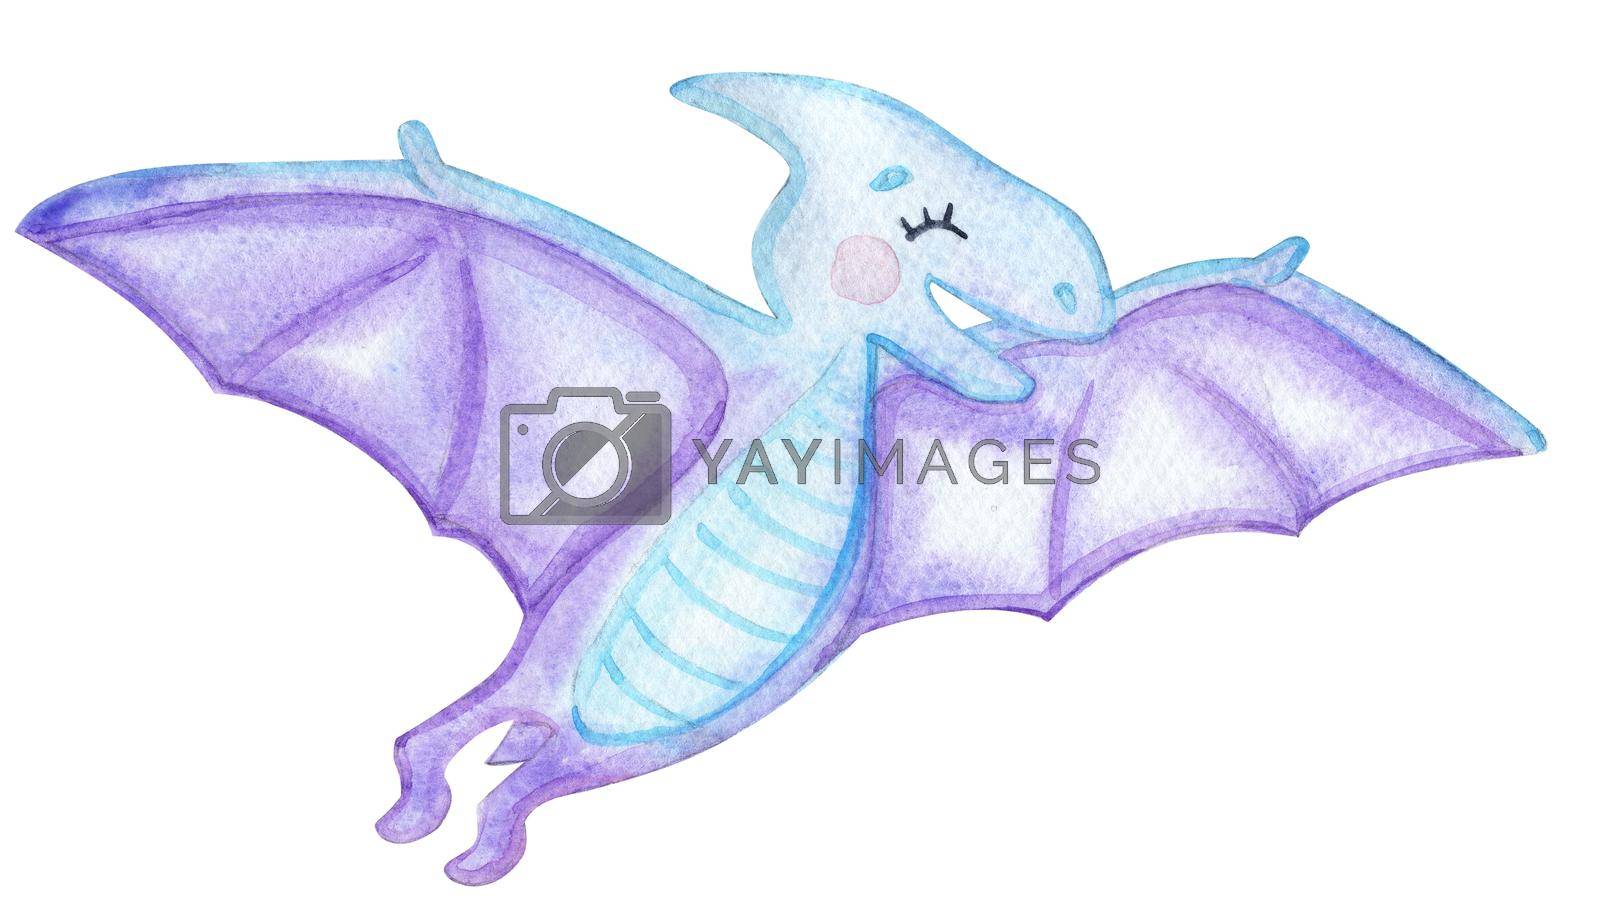 Royalty free image of watercolor blue baby pterodactyl isolated on white background. Cute dinosaur for baby nursery decoration, clothing, print by dreamloud